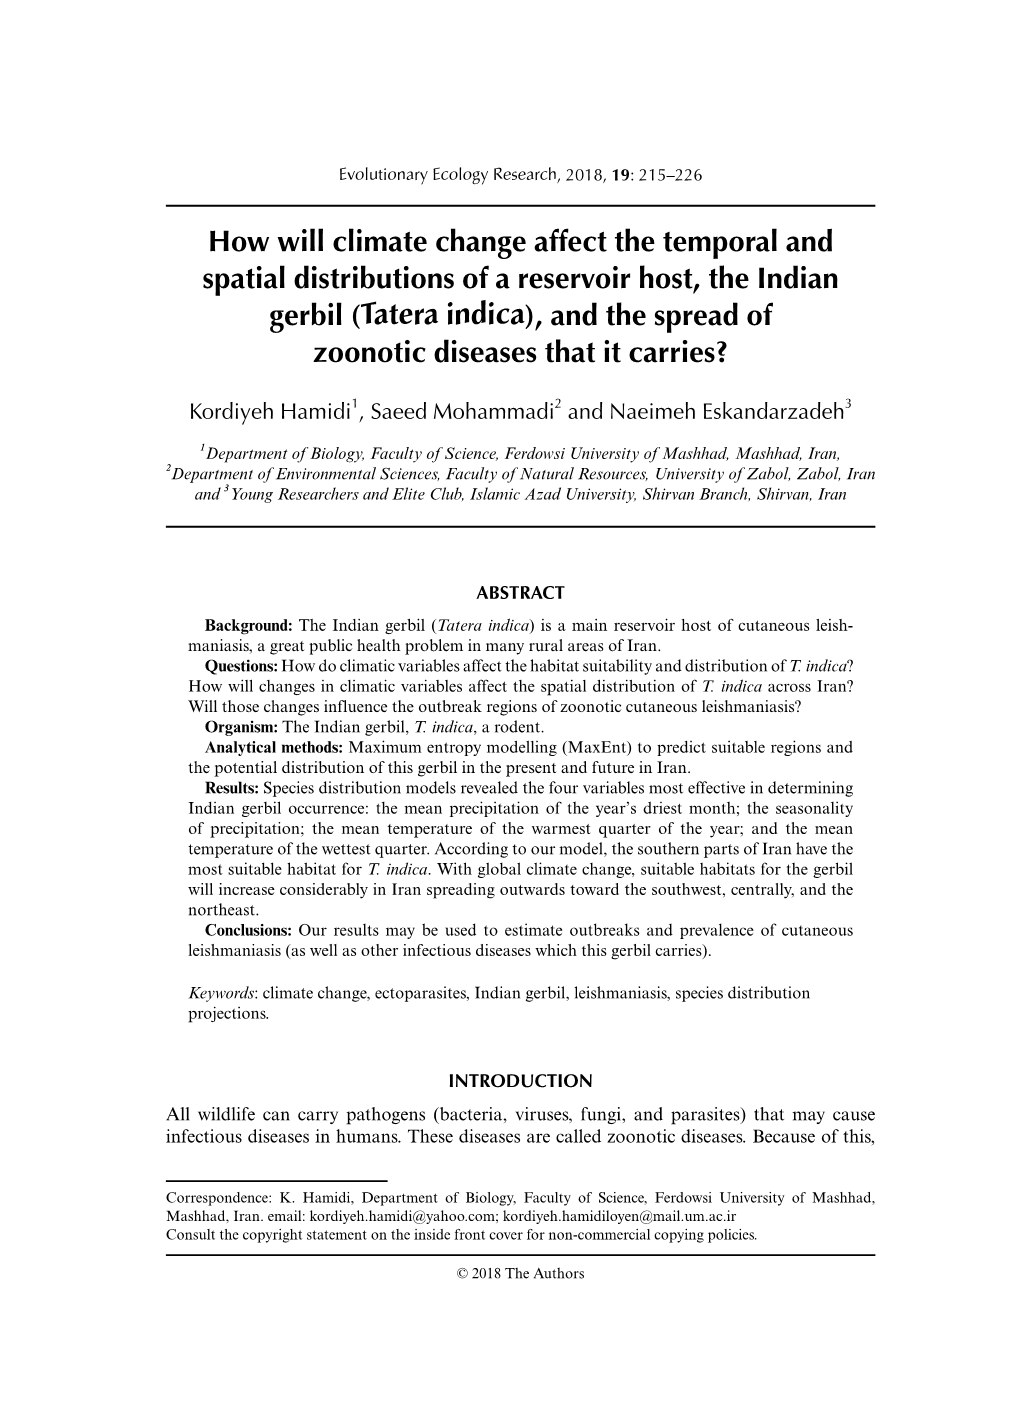 How Will Climate Change Affect the Temporal and Spatial Distributions Of